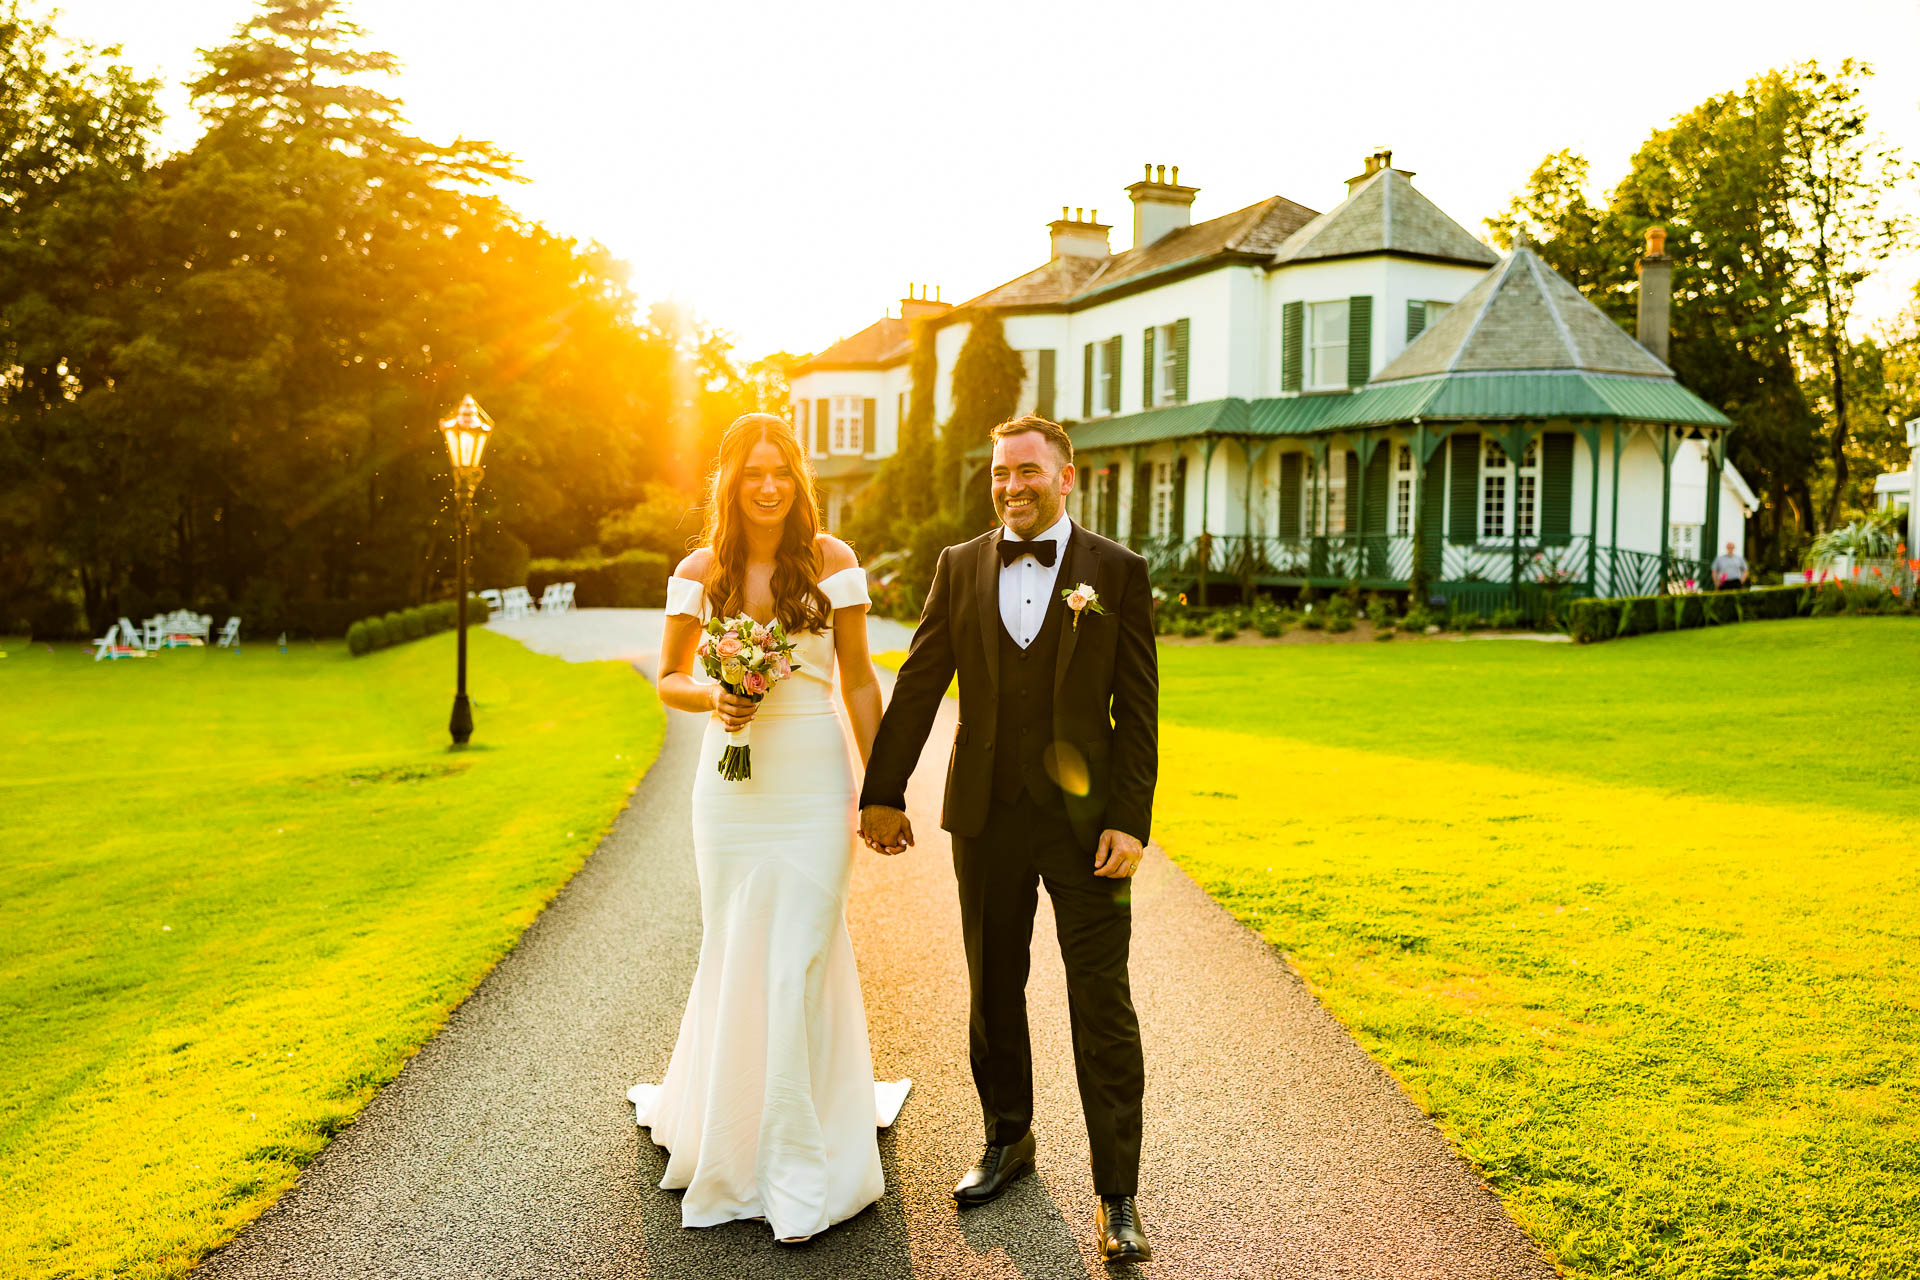 sunset image of a bride and groom in Ashley park house